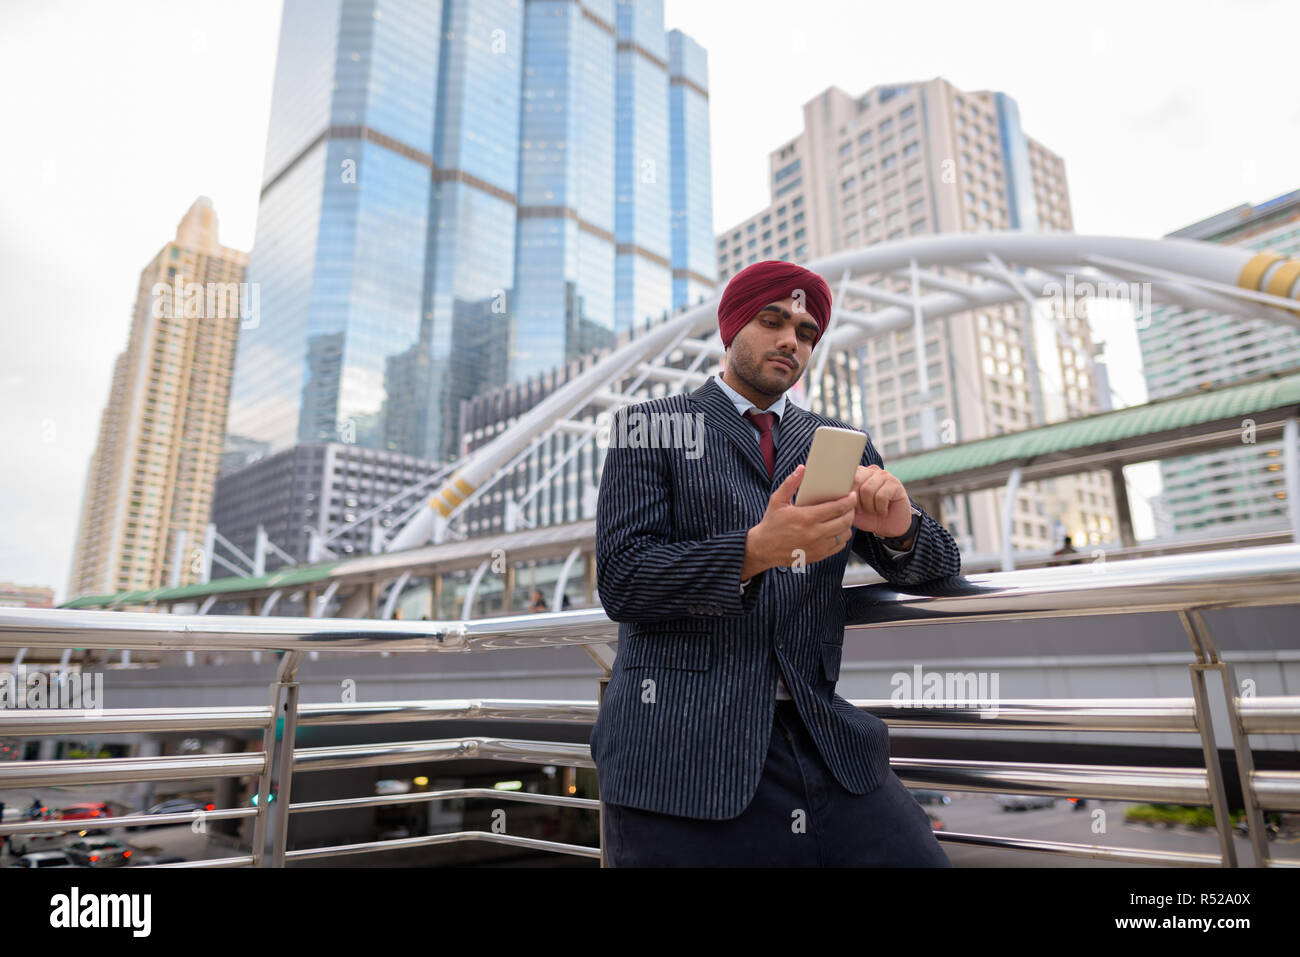 Indian businessman with turban outdoors in city using mobile phone Stock Photo